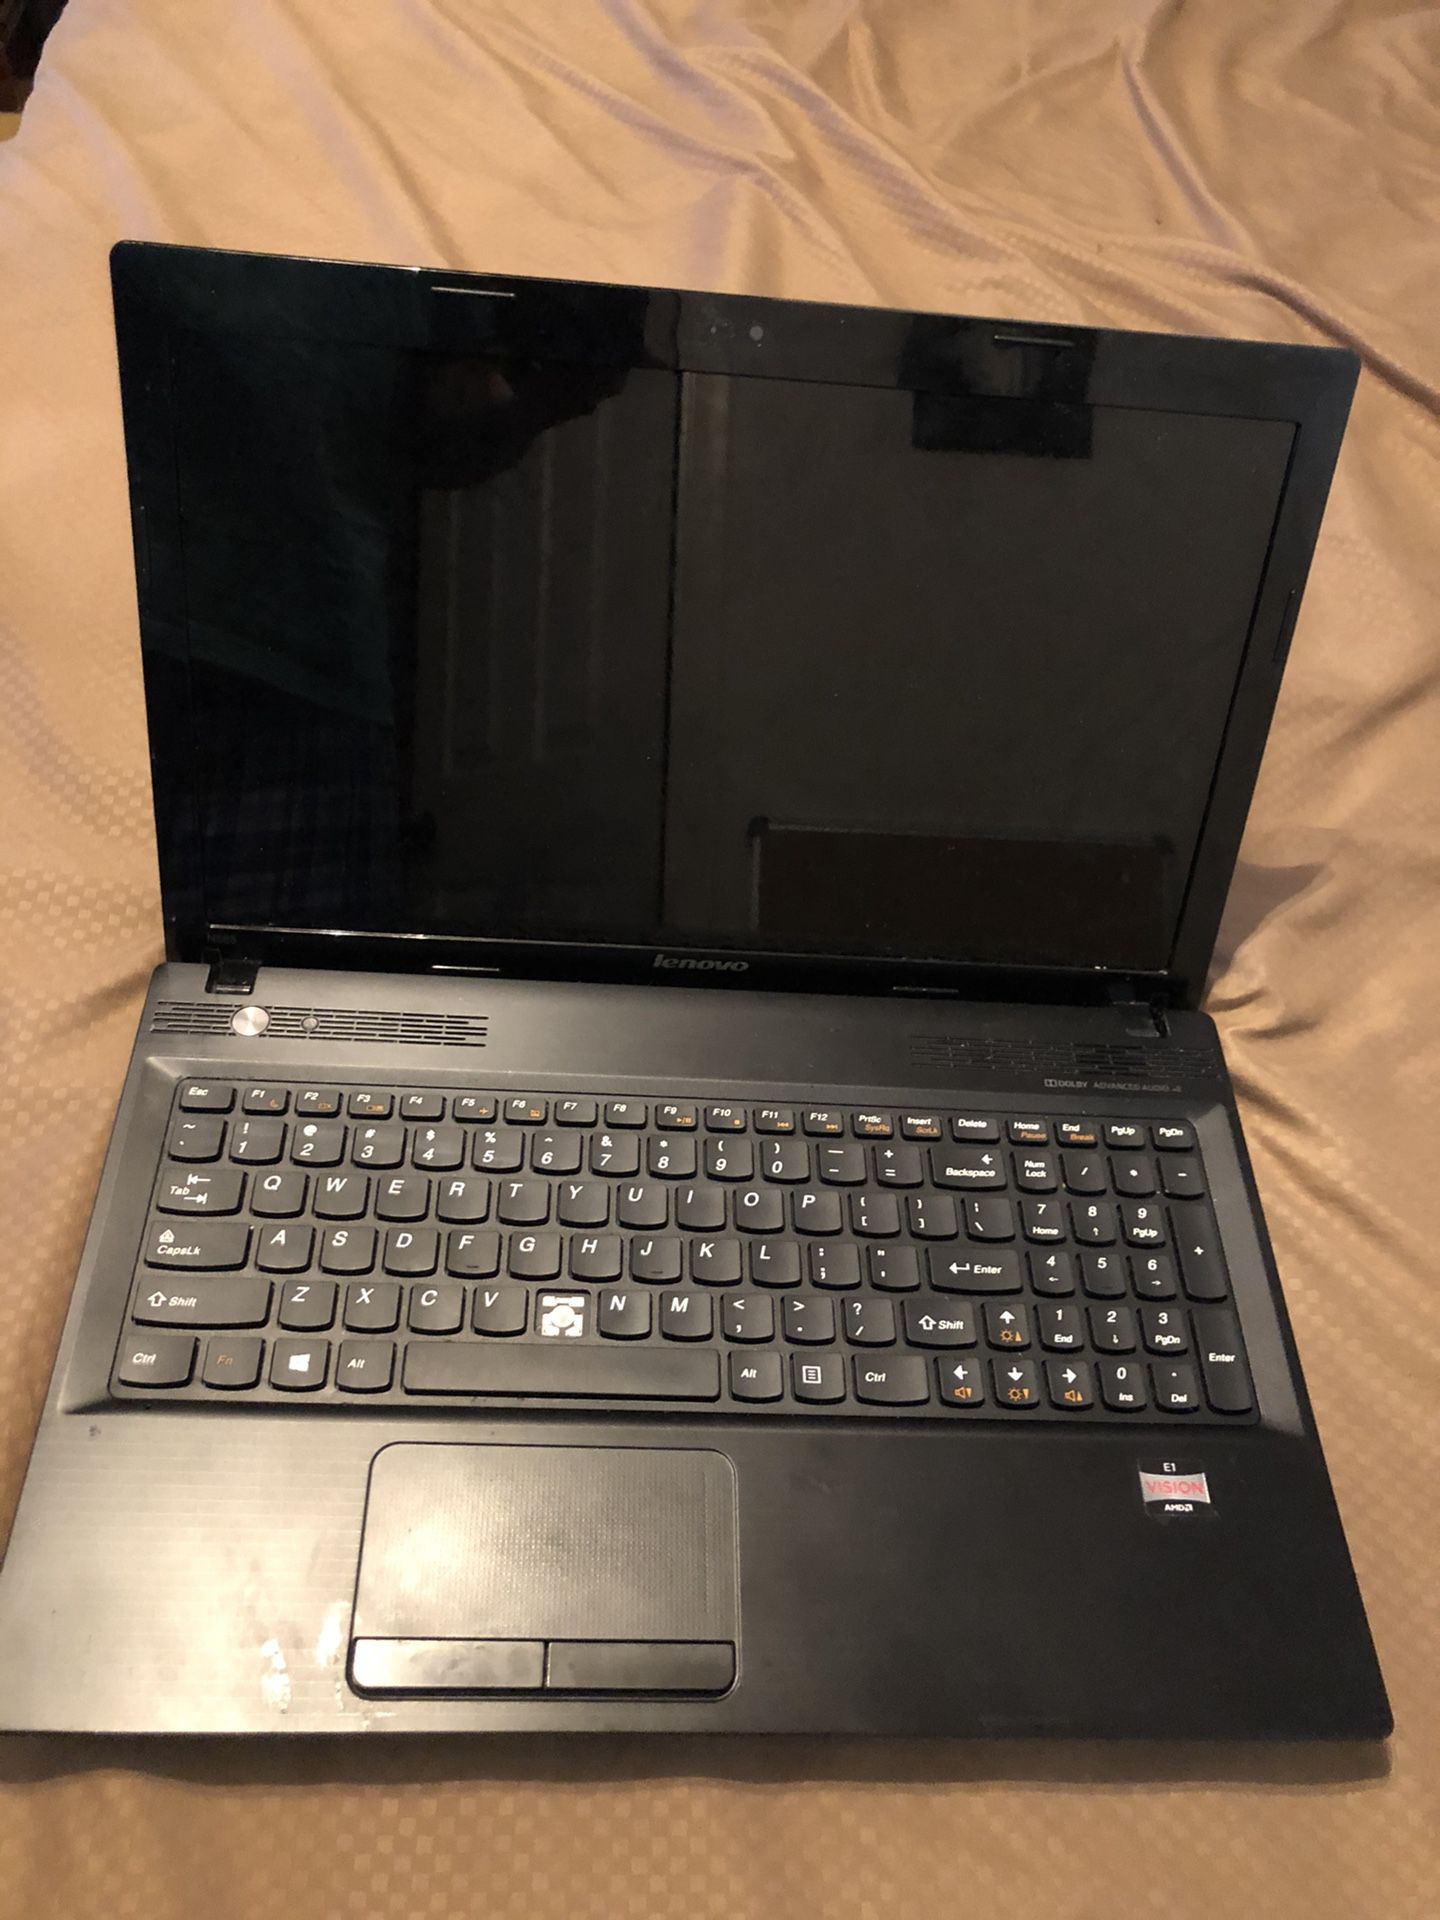 Lenovo laptop works need power adapter b key fell off and is included